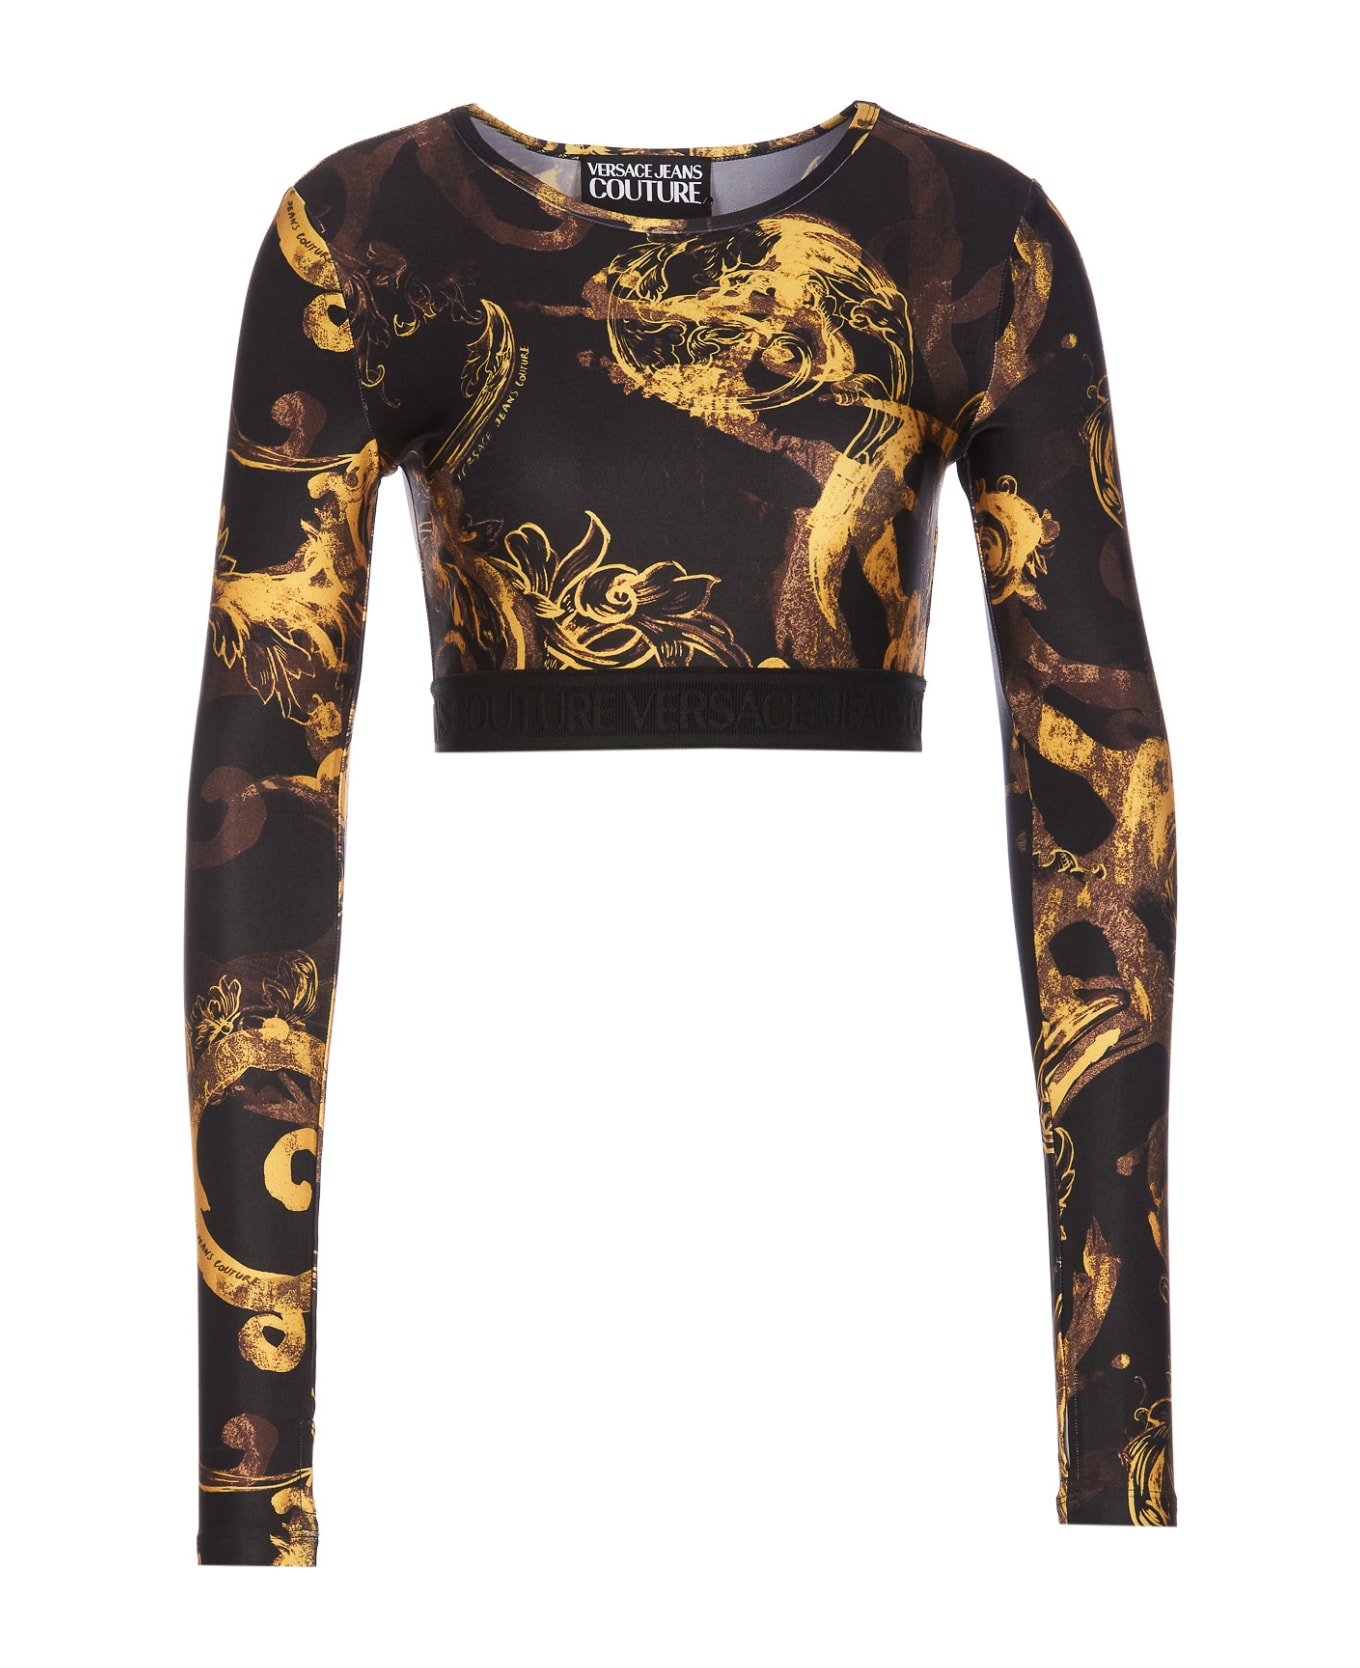 Versace Jeans Couture Watercolour Couture Top - Black